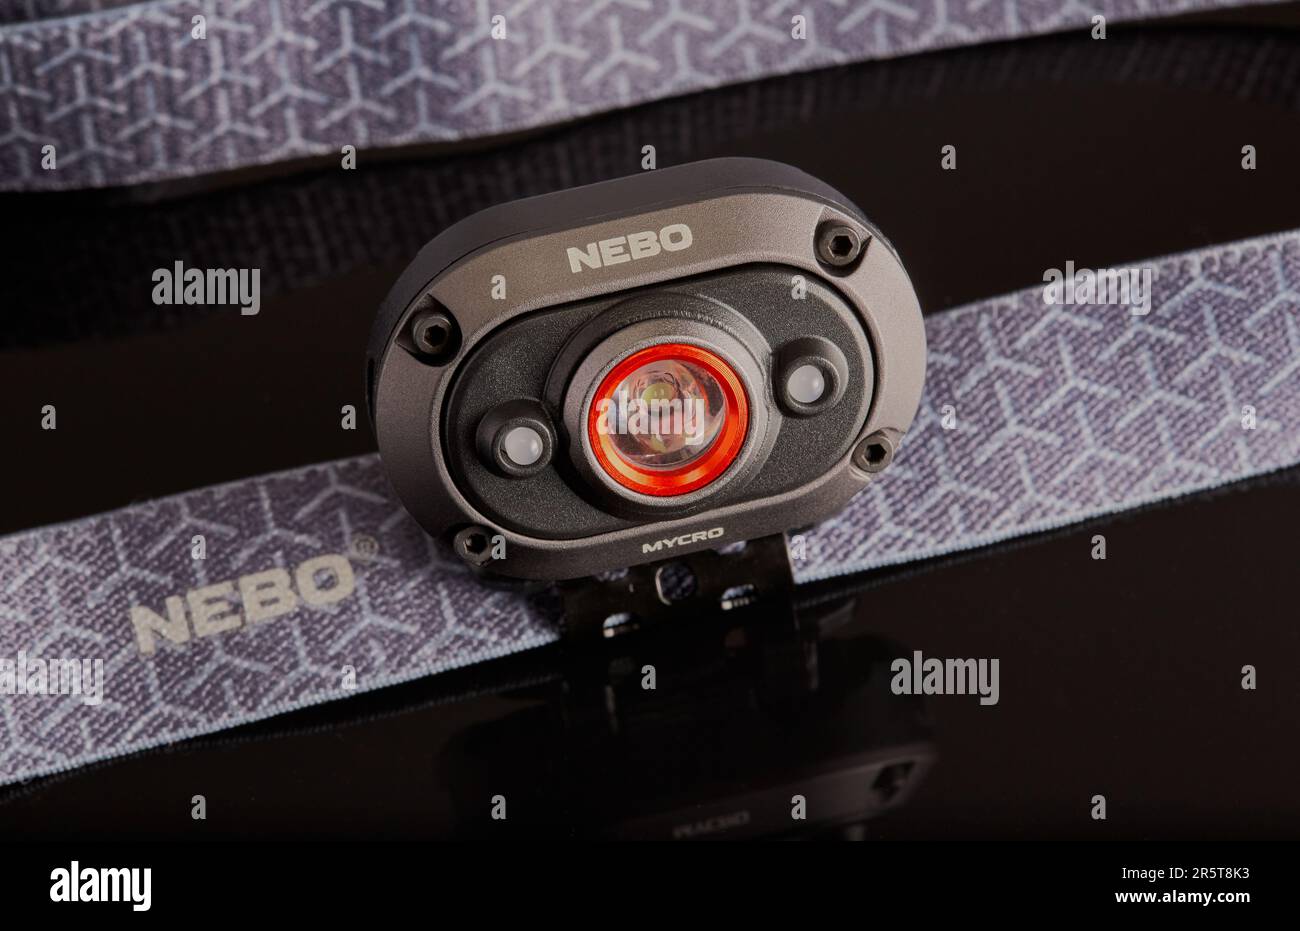 Mansfield,Nottingham,United Kingdom:Studio product image of a Nebo head torch on a black background. Stock Photo